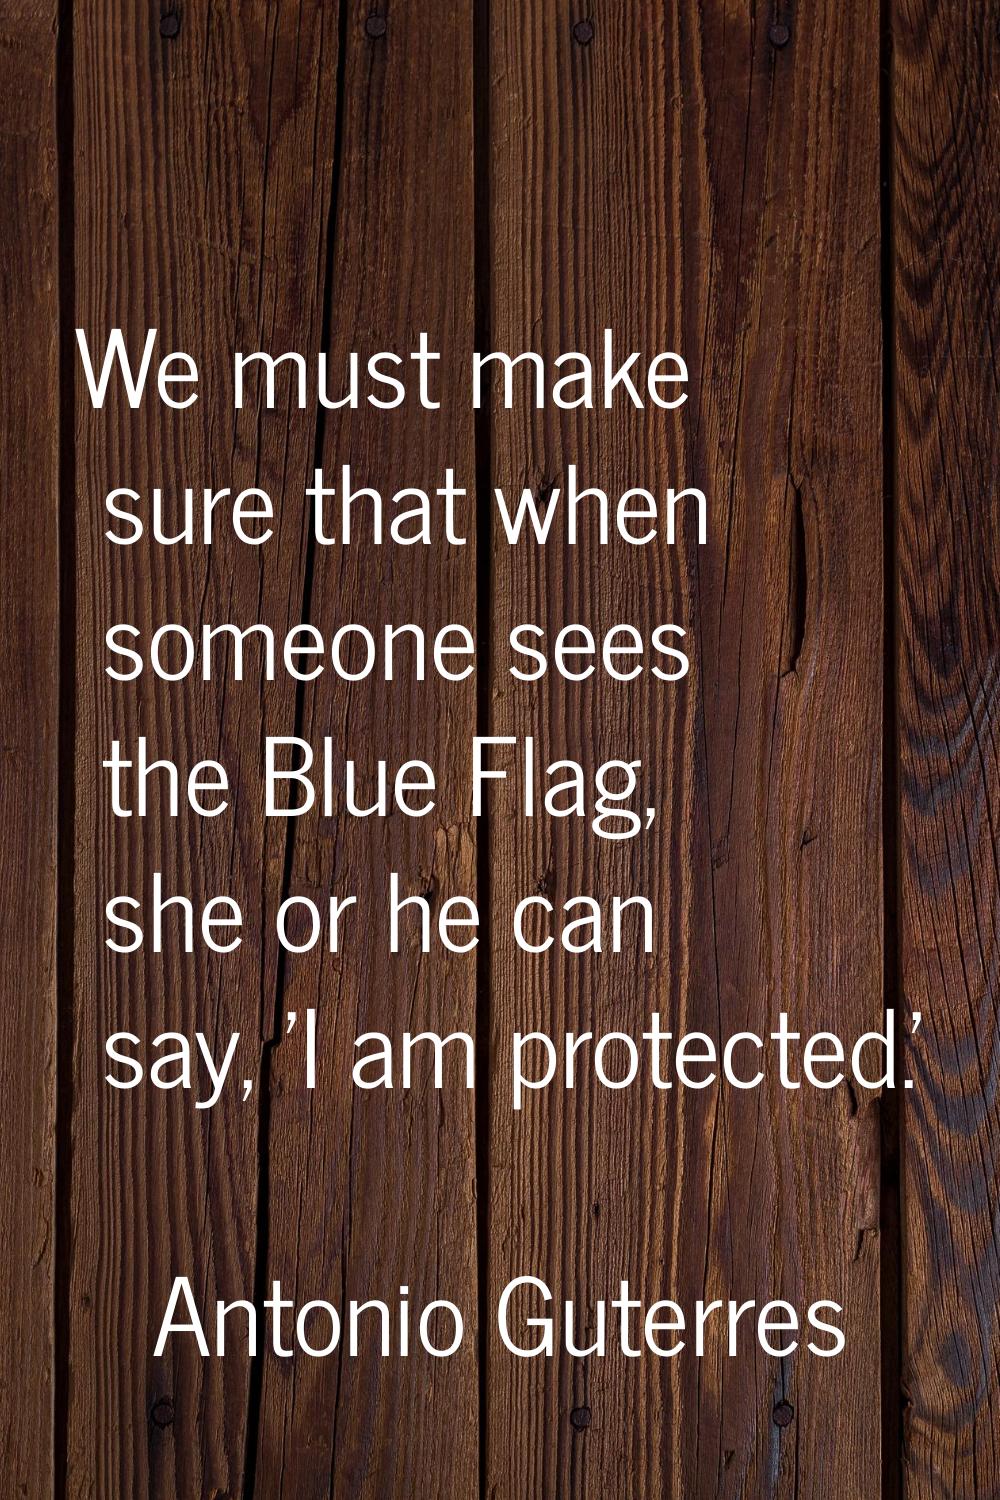 We must make sure that when someone sees the Blue Flag, she or he can say, 'I am protected.'